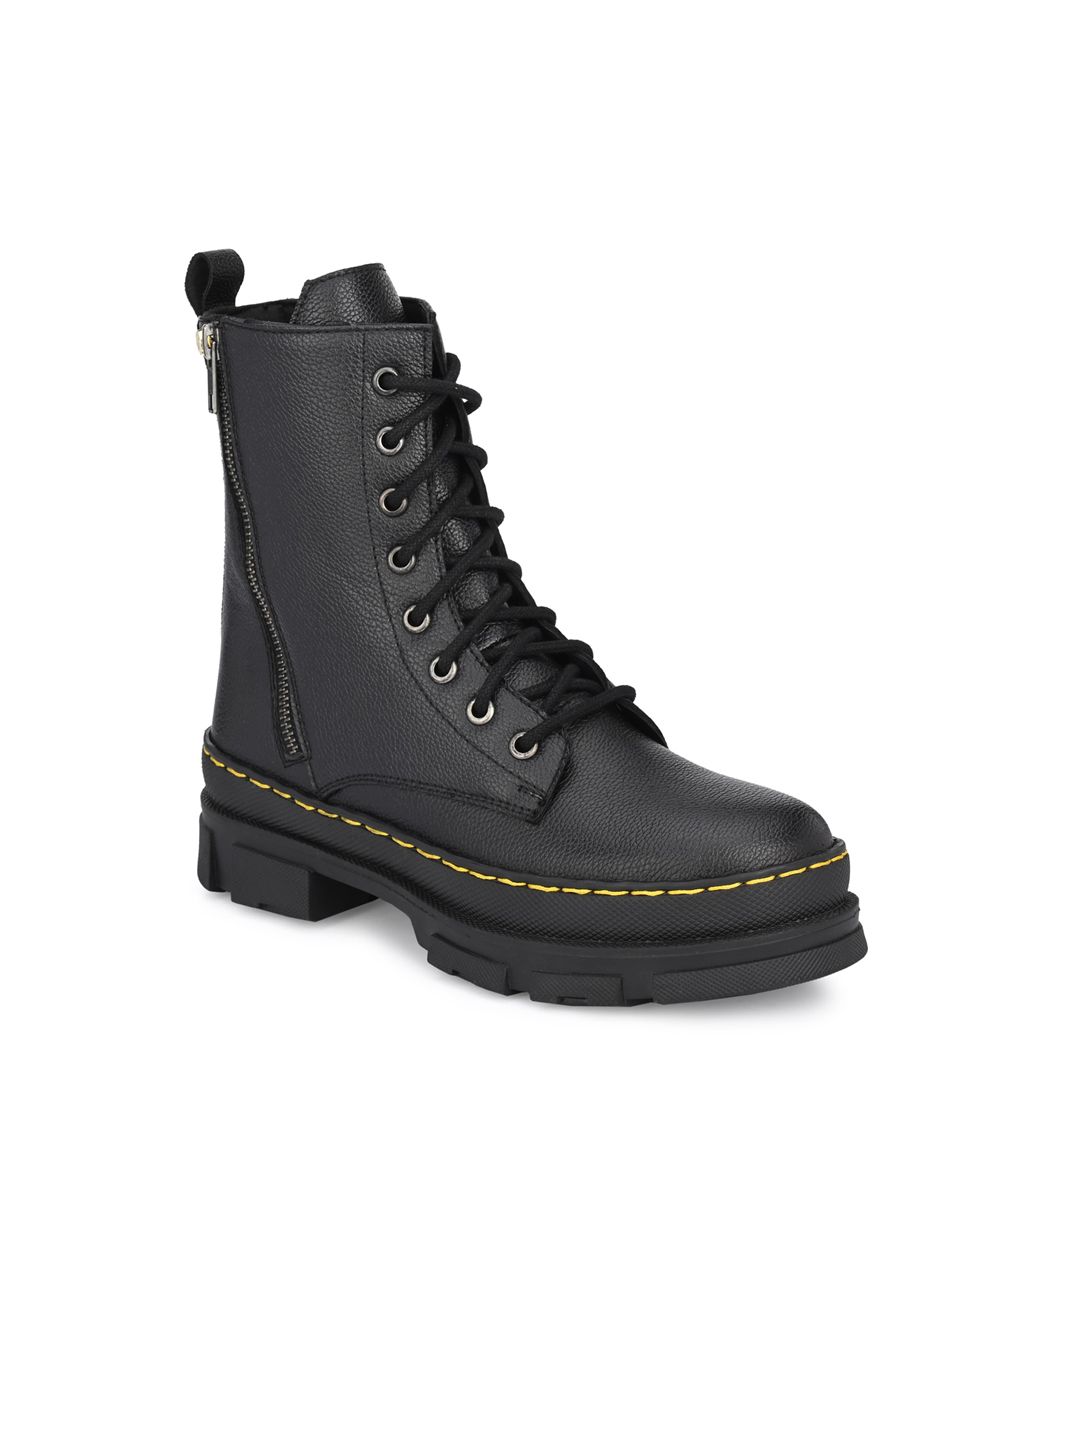 Delize Black High-Top Block Heeled Boots Price in India